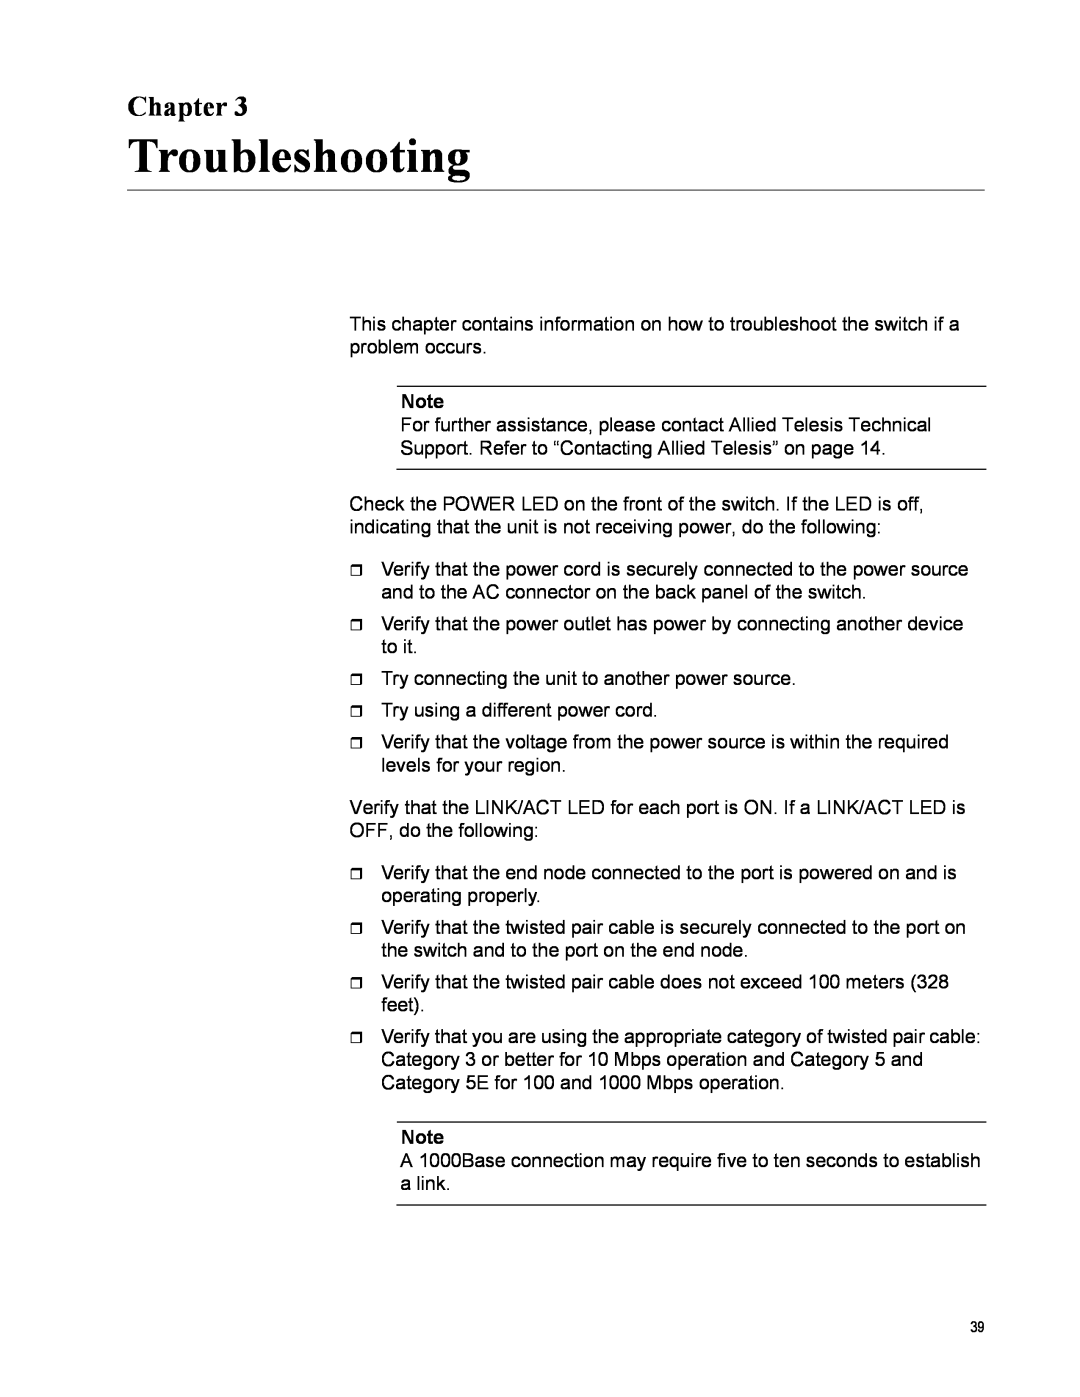 Allied Telesis AT-GS950/16-10 manual Troubleshooting, Chapter 